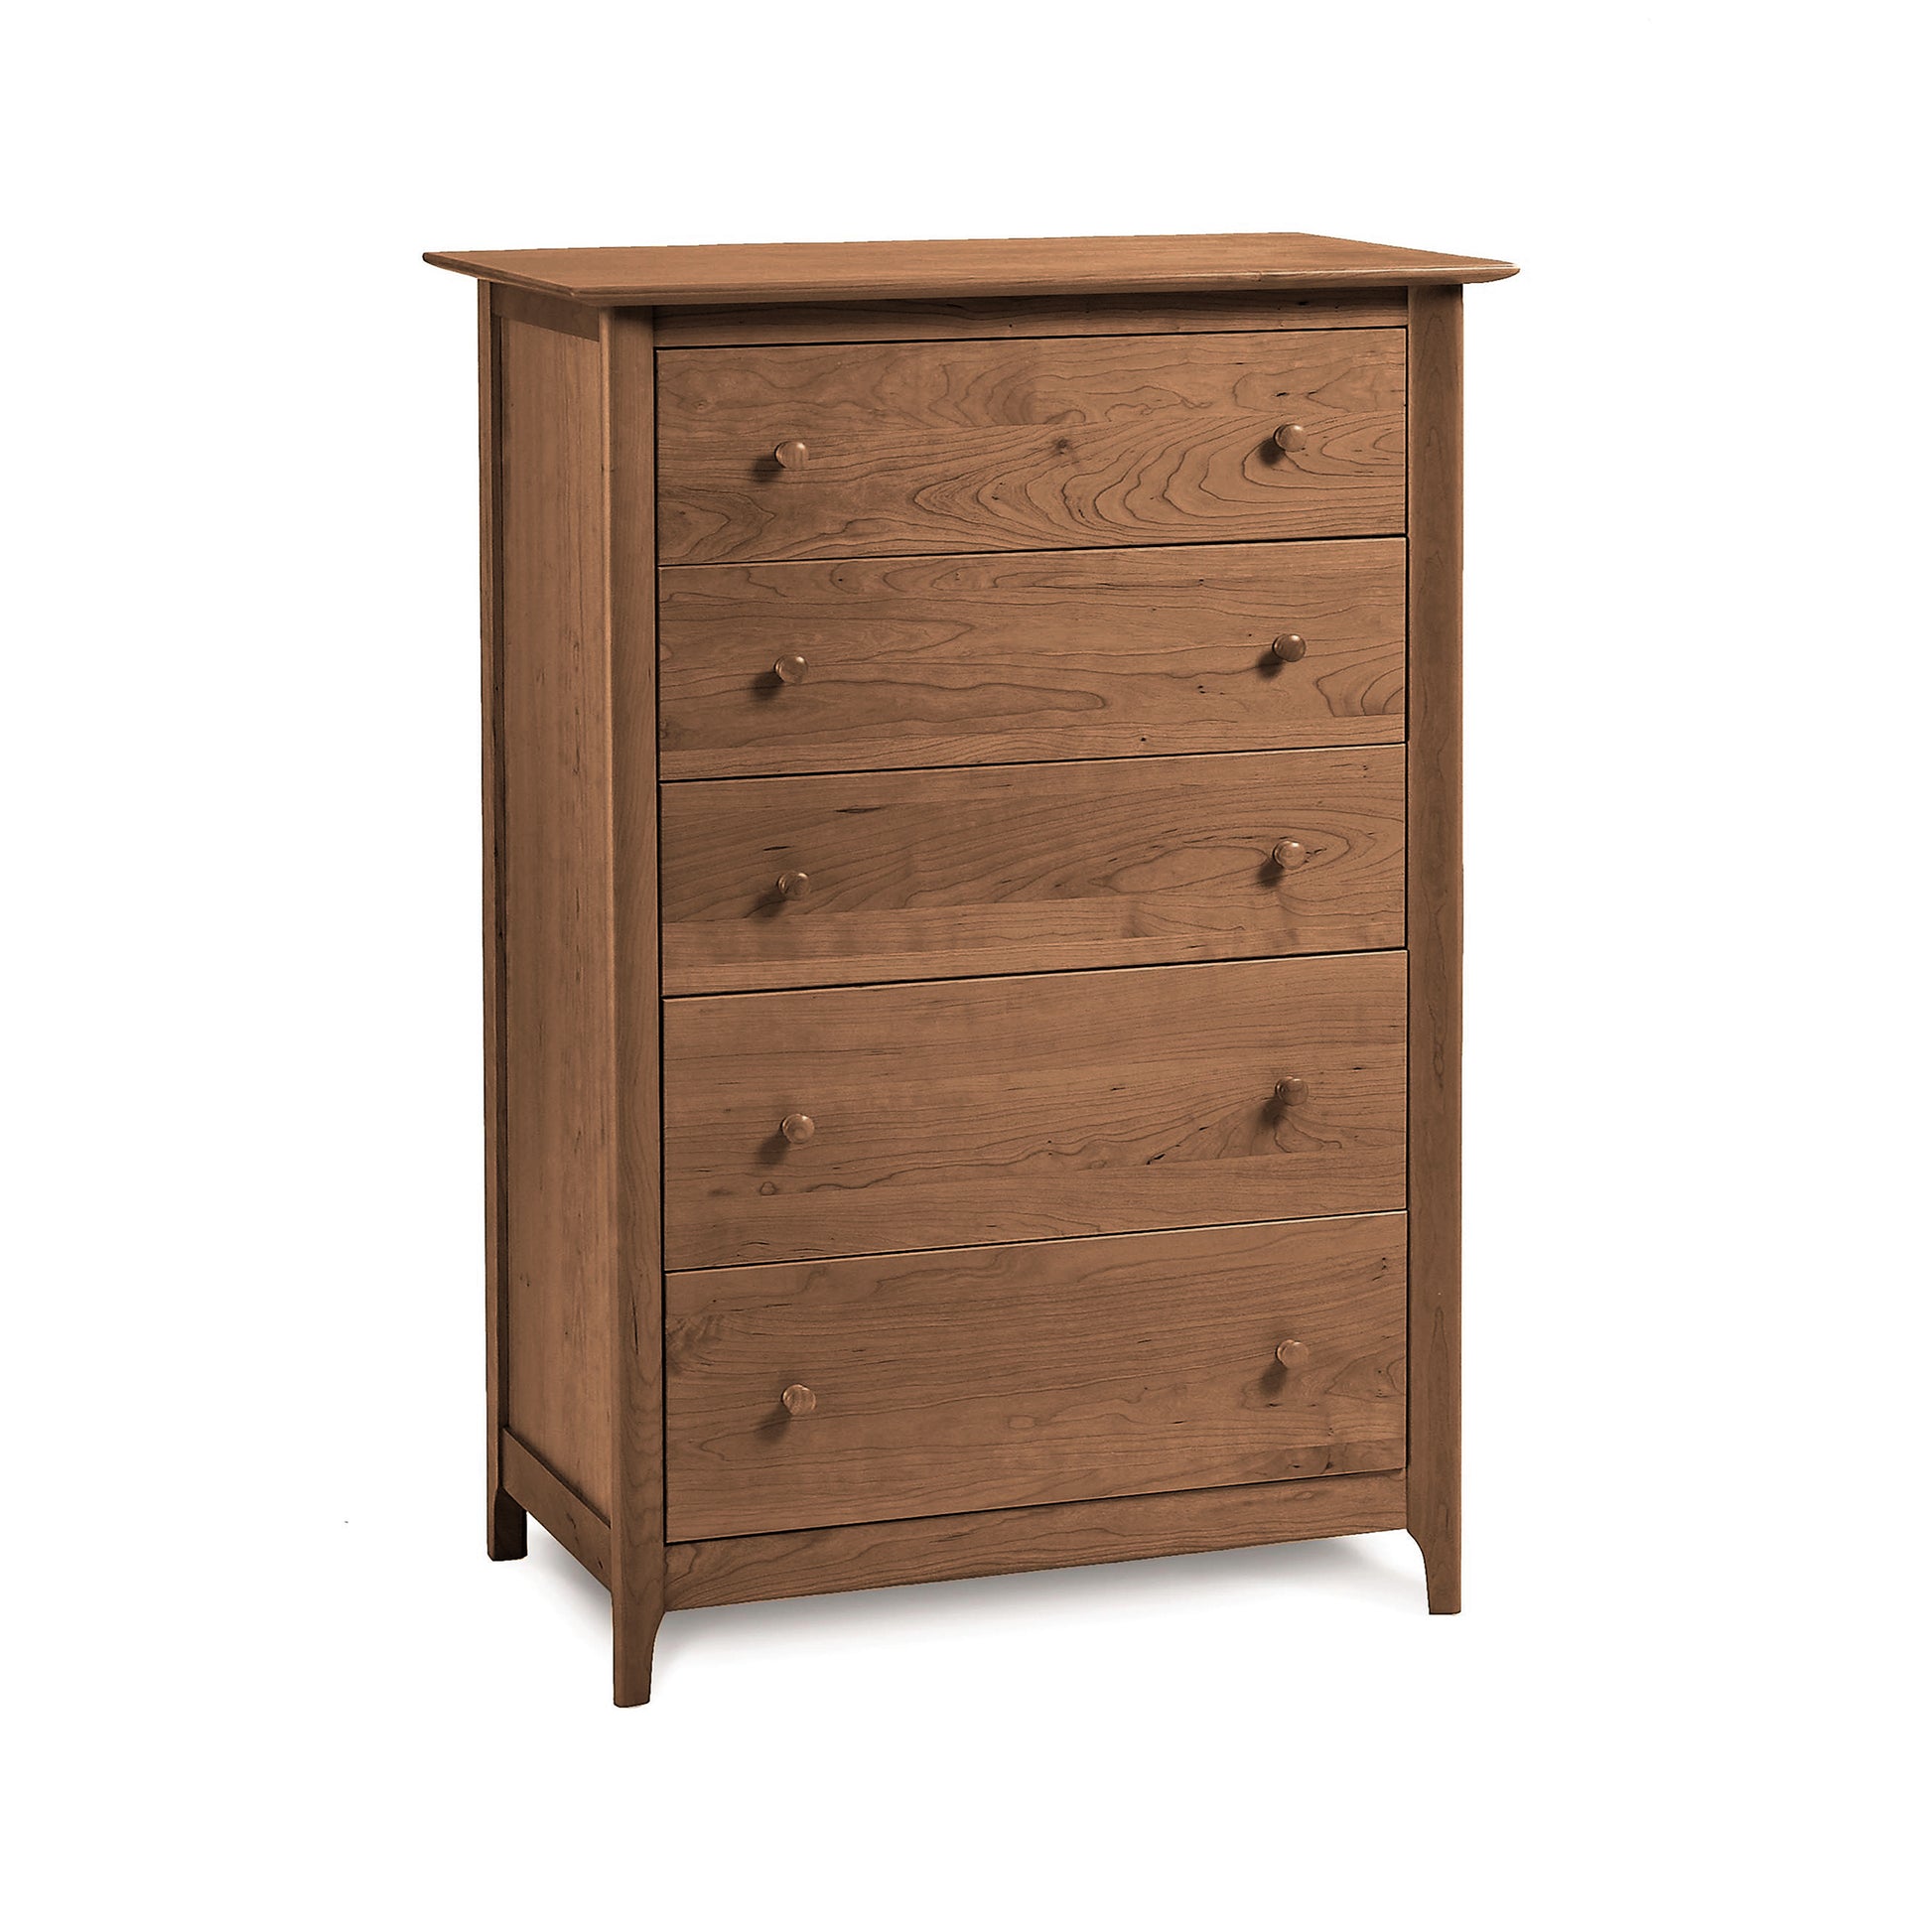 A Copeland Furniture Sarah 5-Drawer Chest in natural cherry wood with round knobs on a white background.